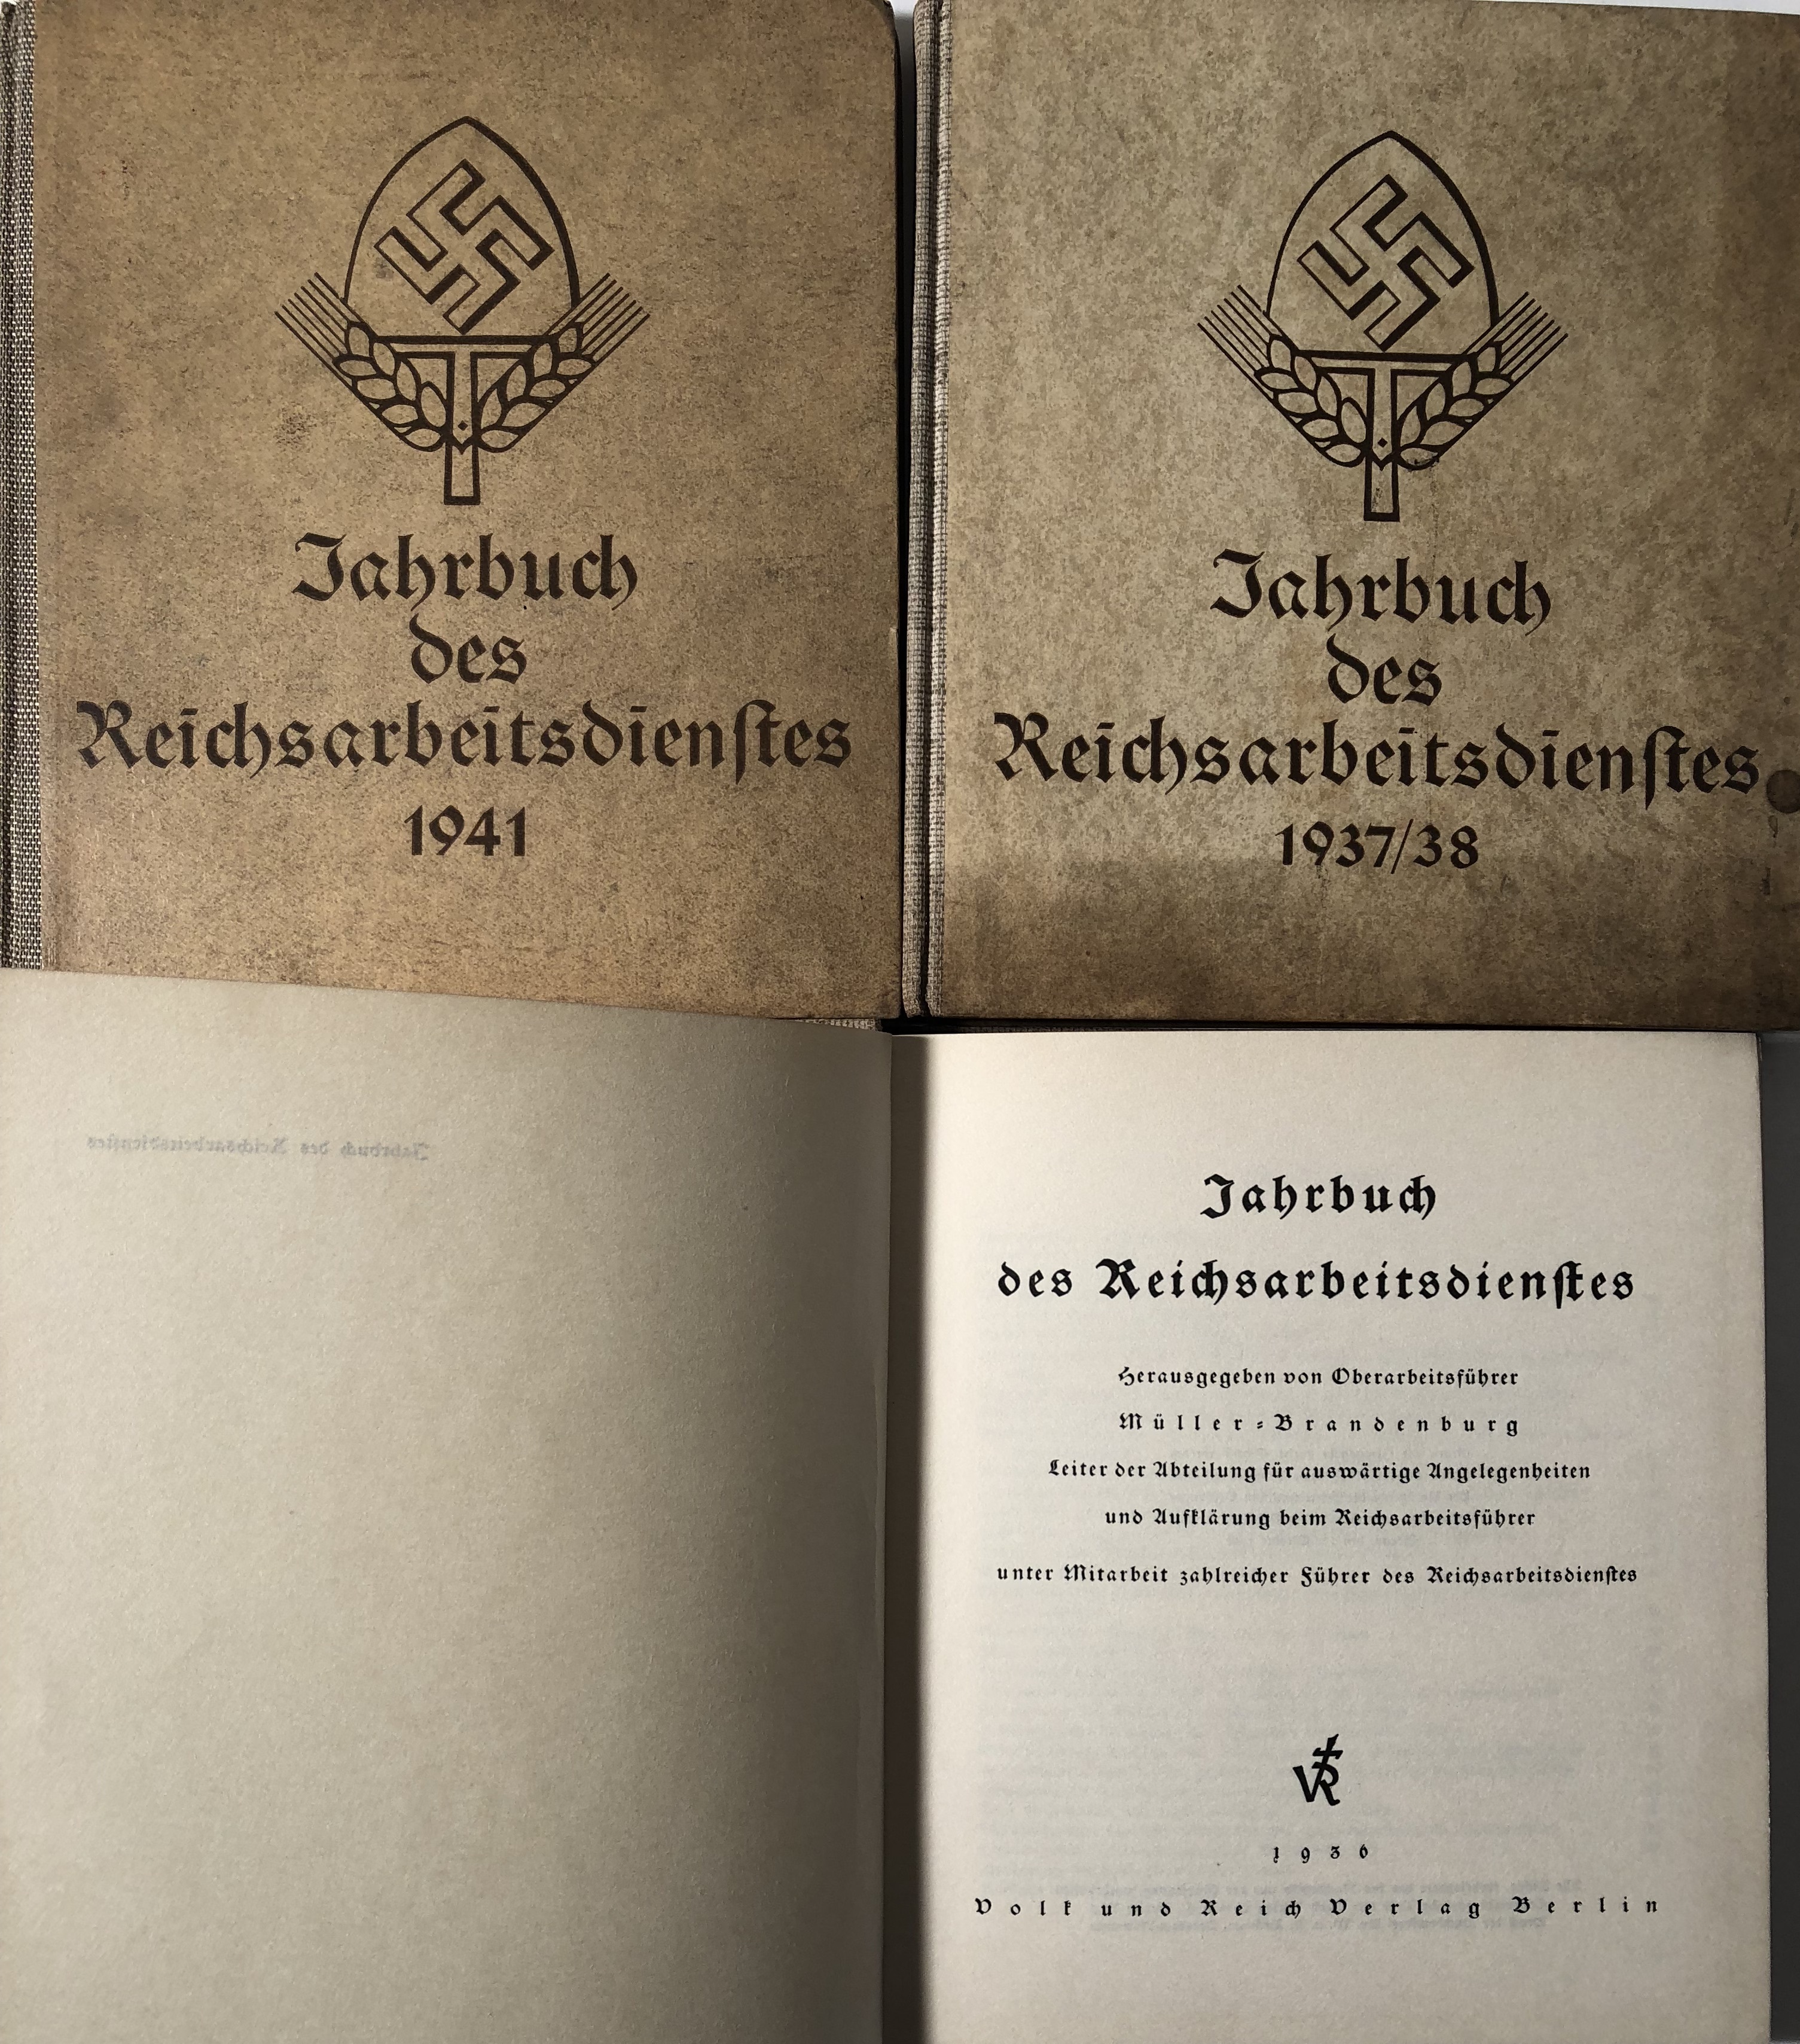 THIRD REICH BOOKS. - Image 8 of 14